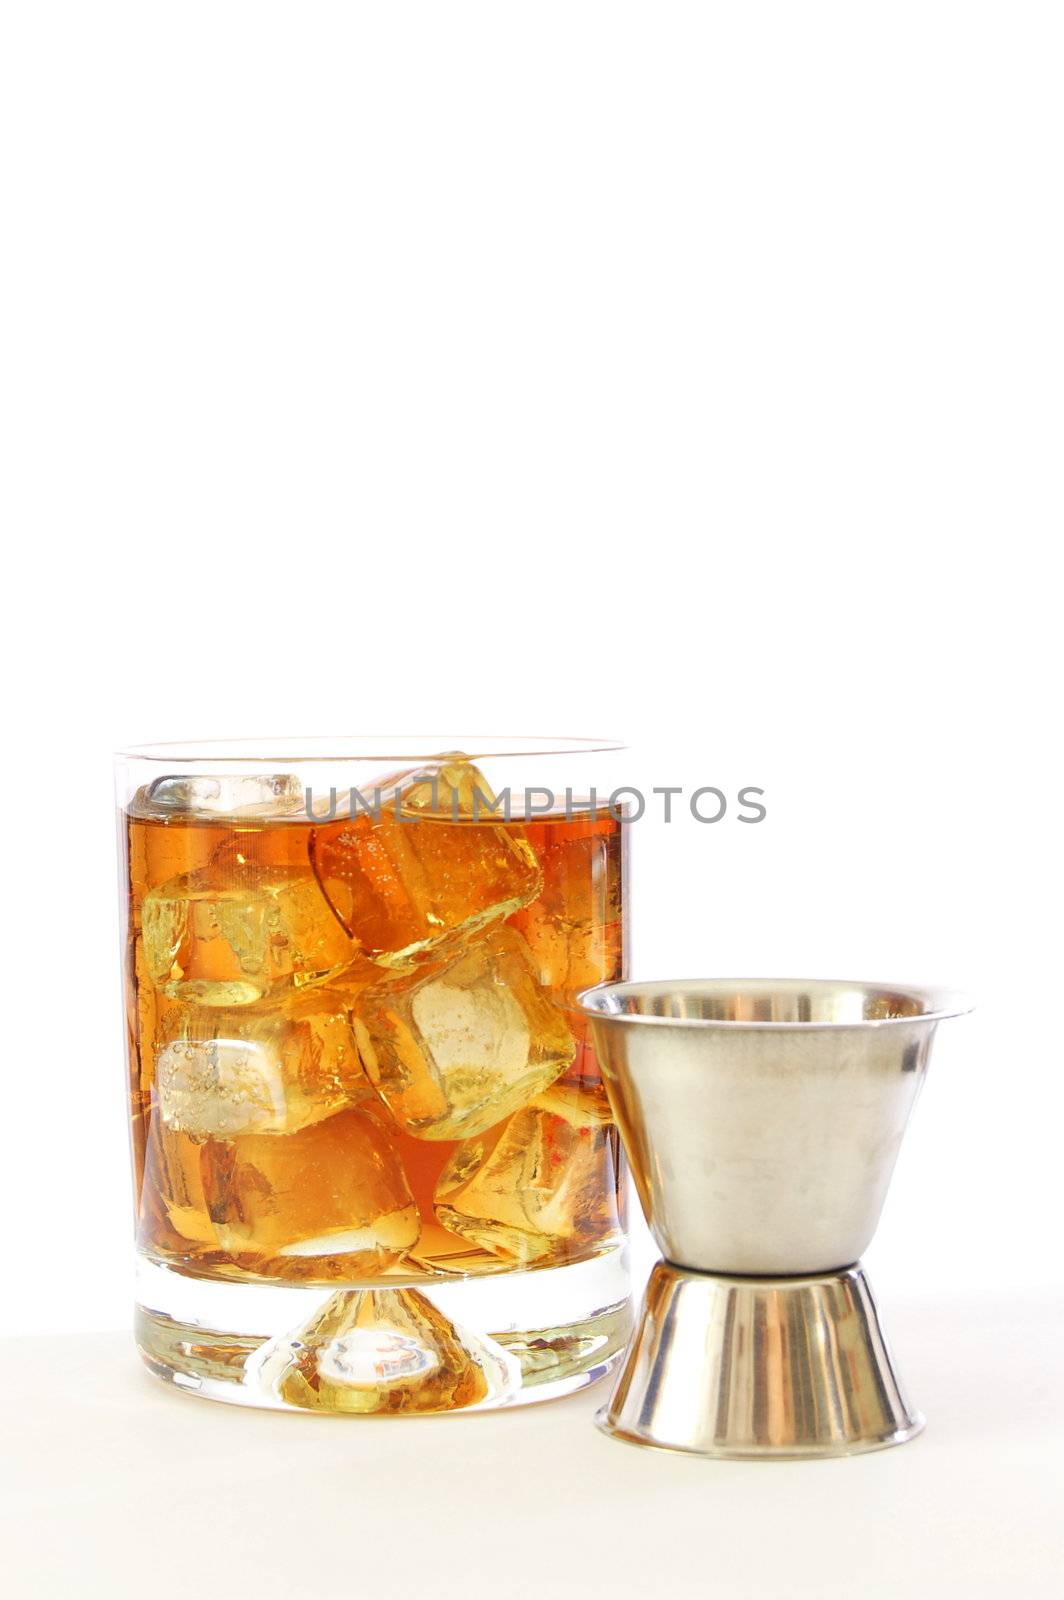 whisky on the rocks by gunnar3000